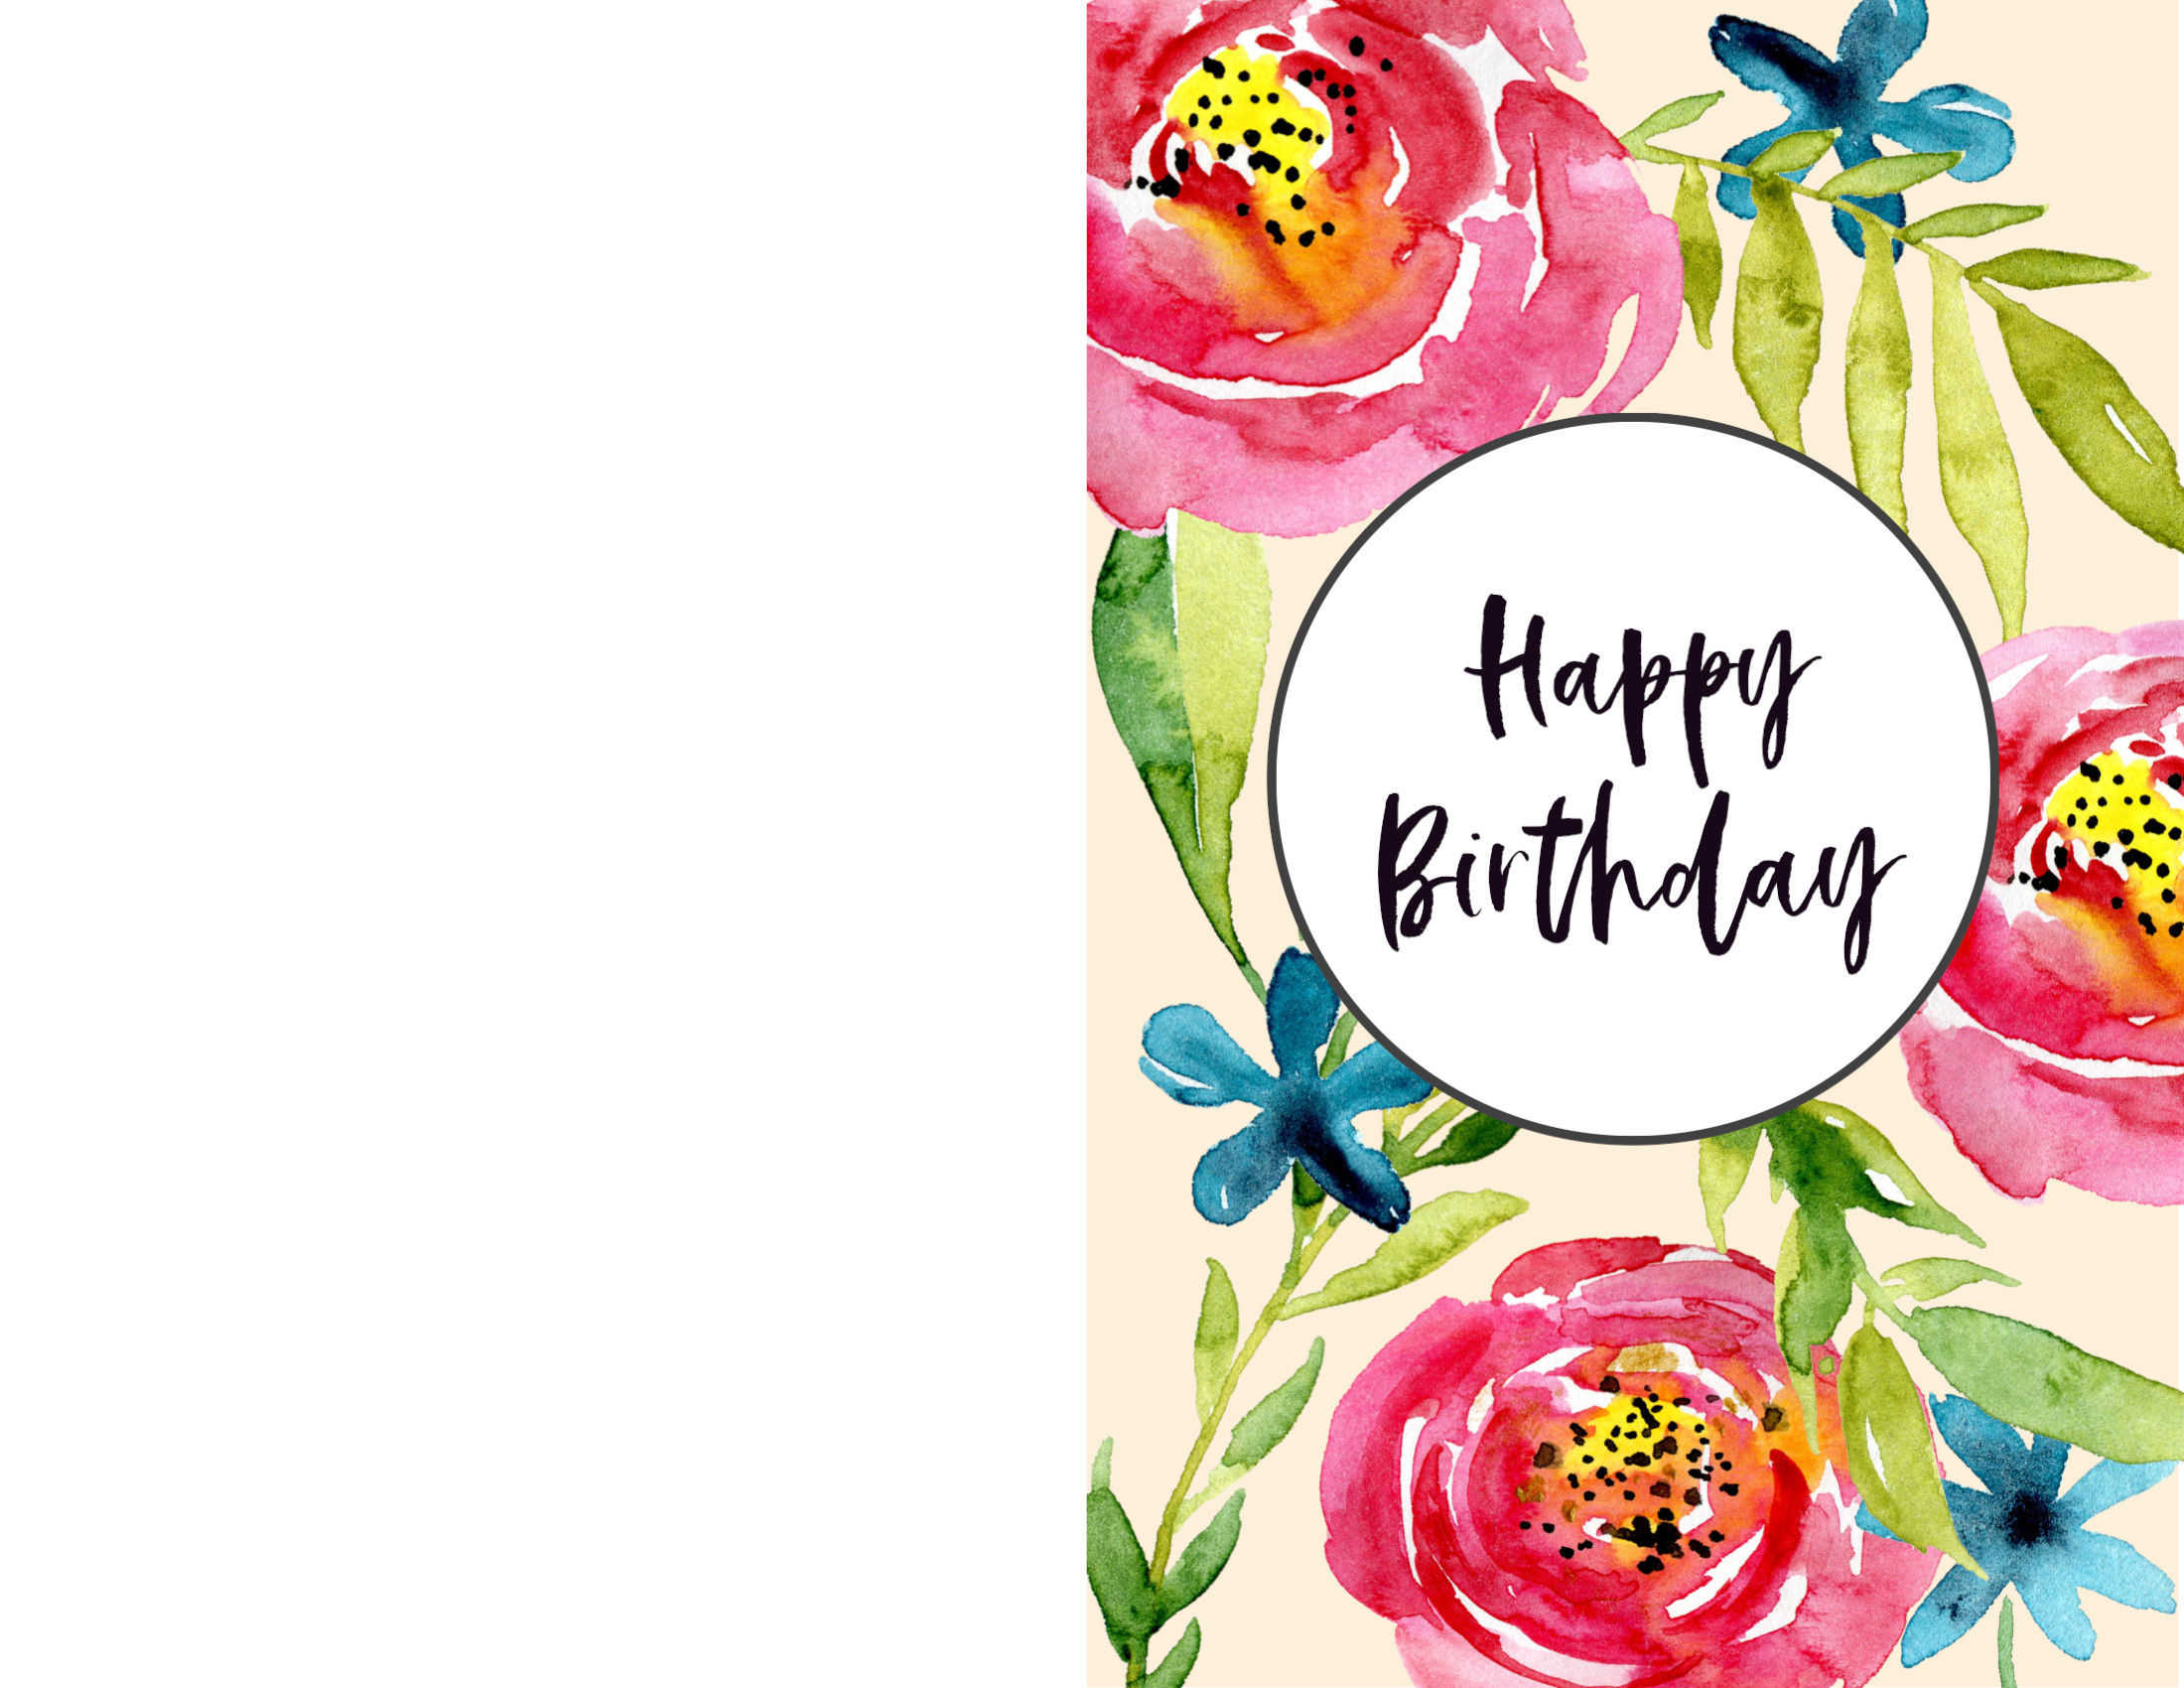 Happy Birthday Cards To Print
 Free Printable Birthday Cards Paper Trail Design